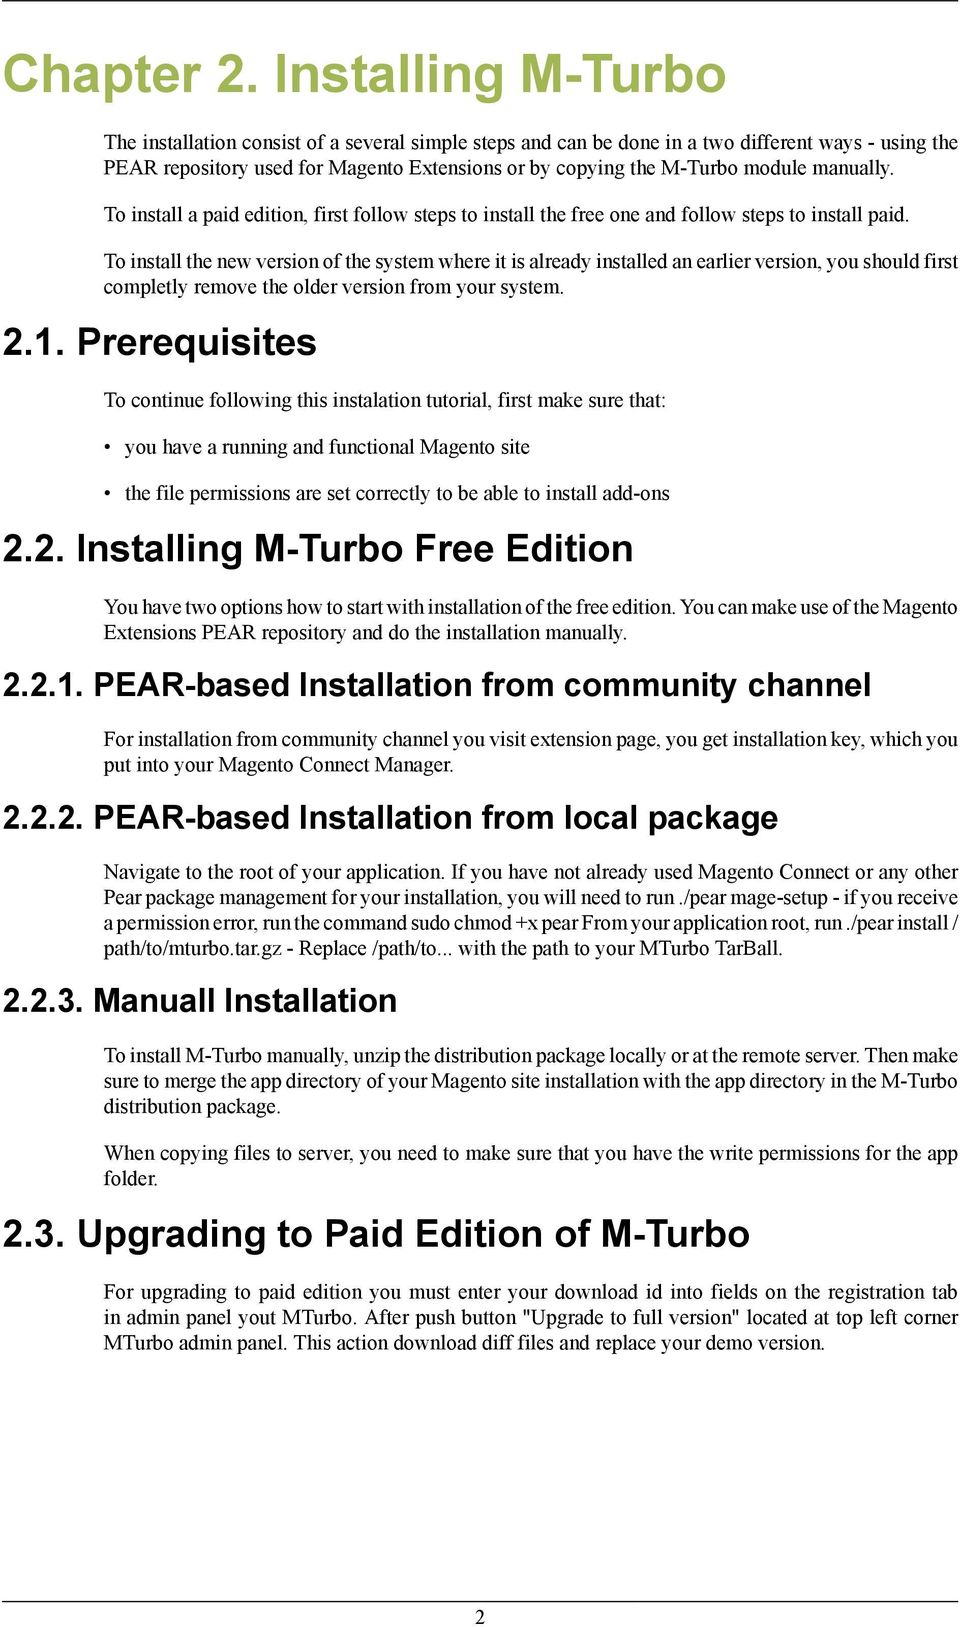 manually. To install a paid edition, first follow steps to install the free one and follow steps to install paid.